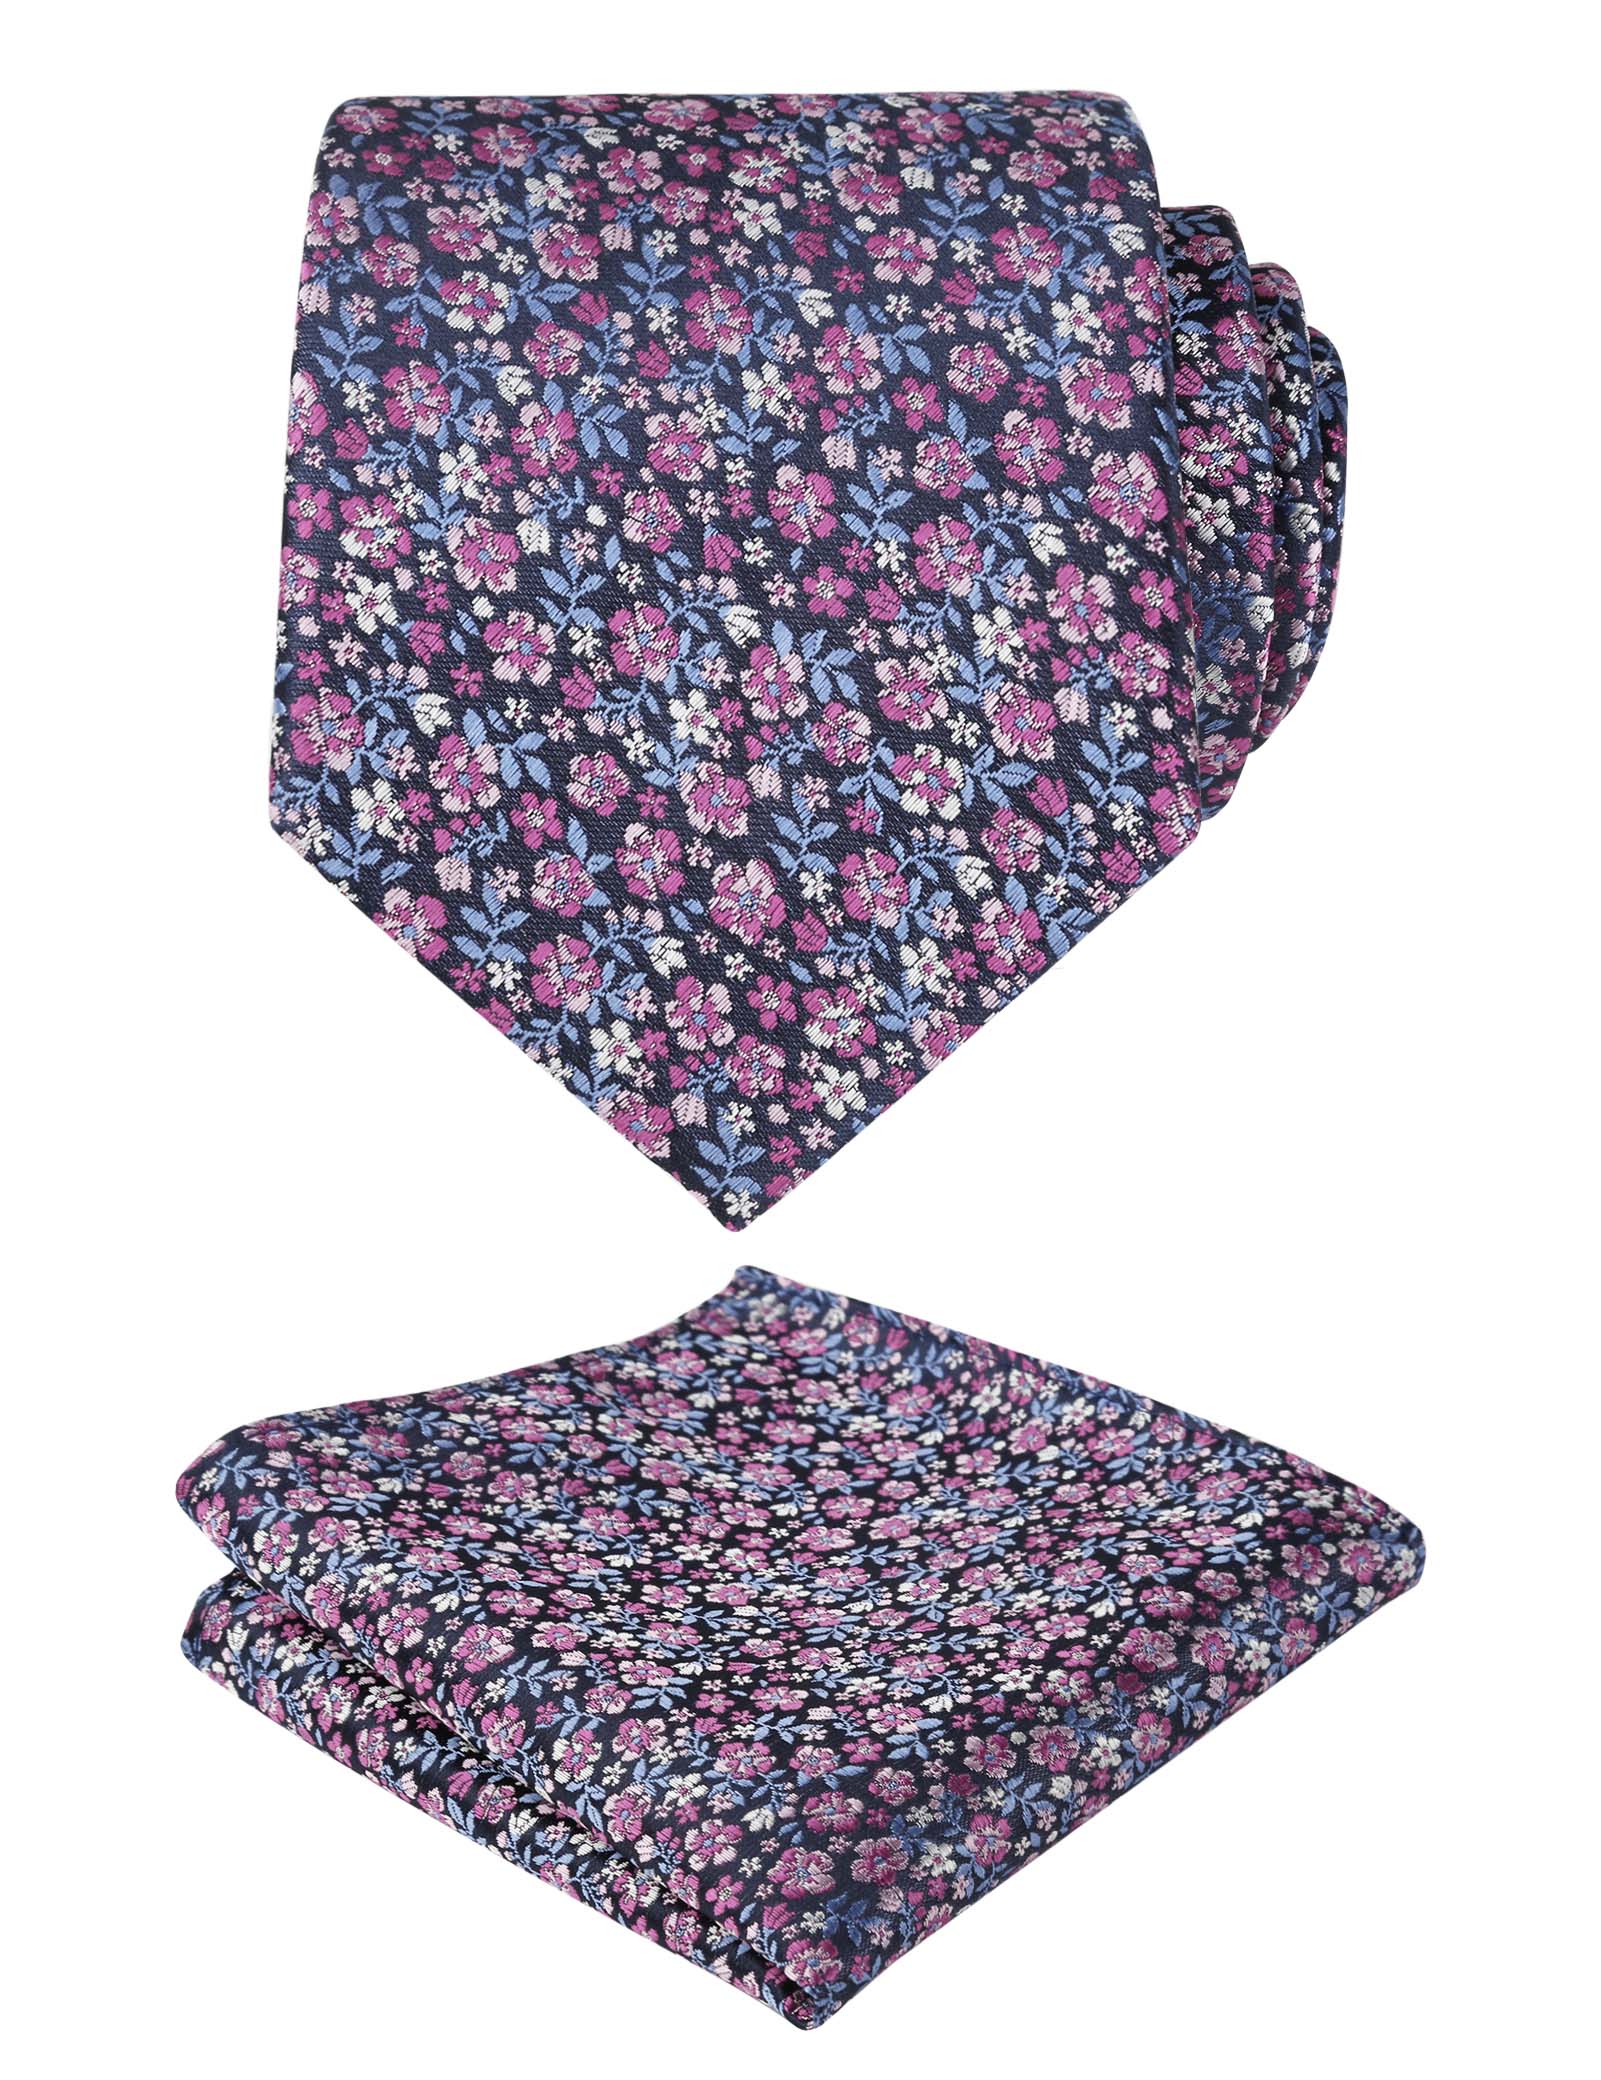 Men's Floral Pattern Tie with Flower Printed Pocket Square 3.15inches Colorful Tie Set, #142